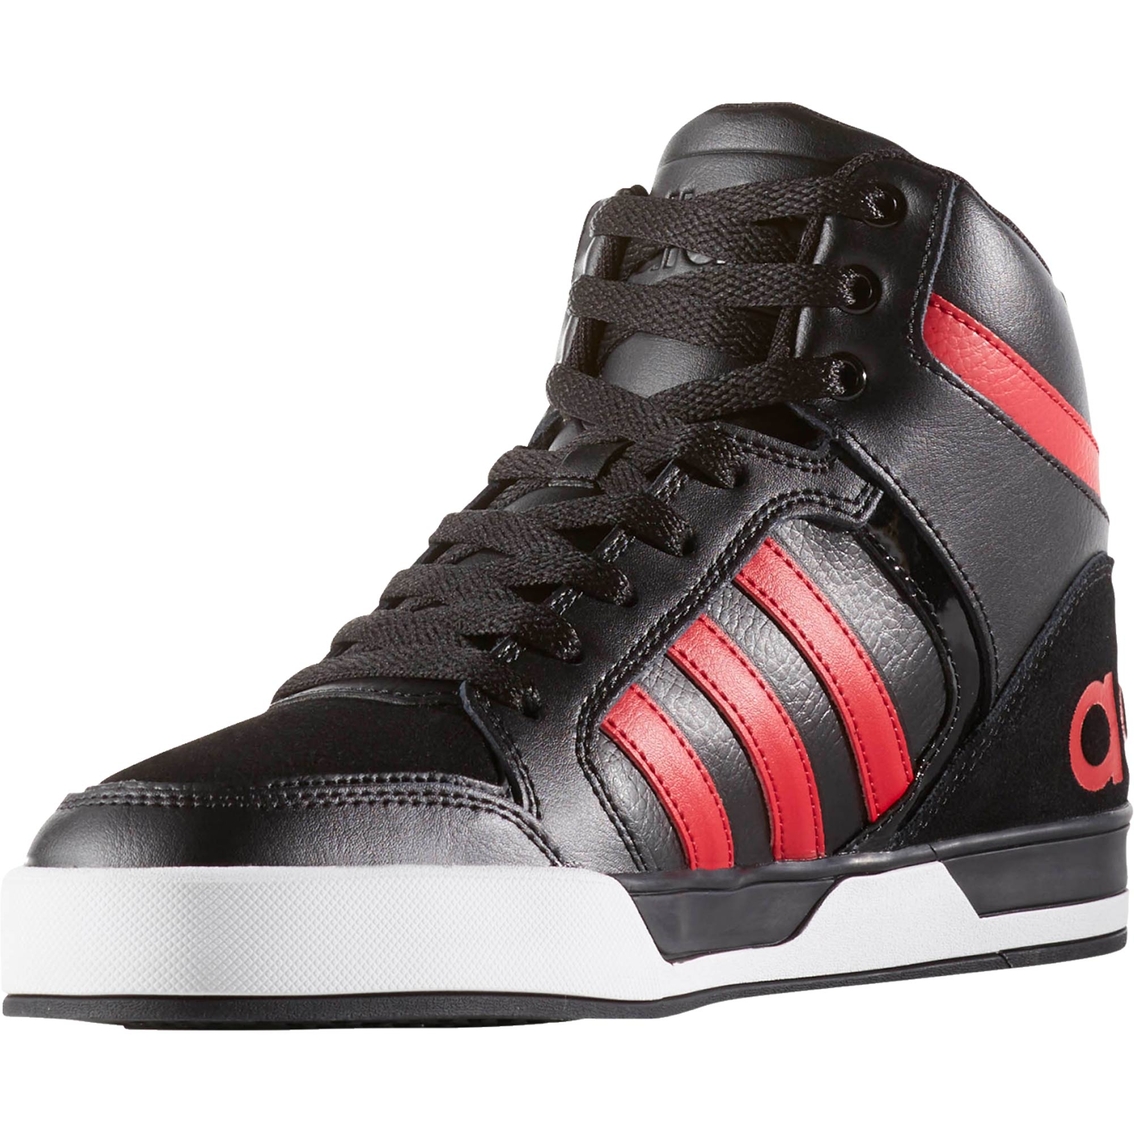 Adidas Men's Raleigh 9tis Mid Basketball Shoes | Men's Athletic Shoes ...